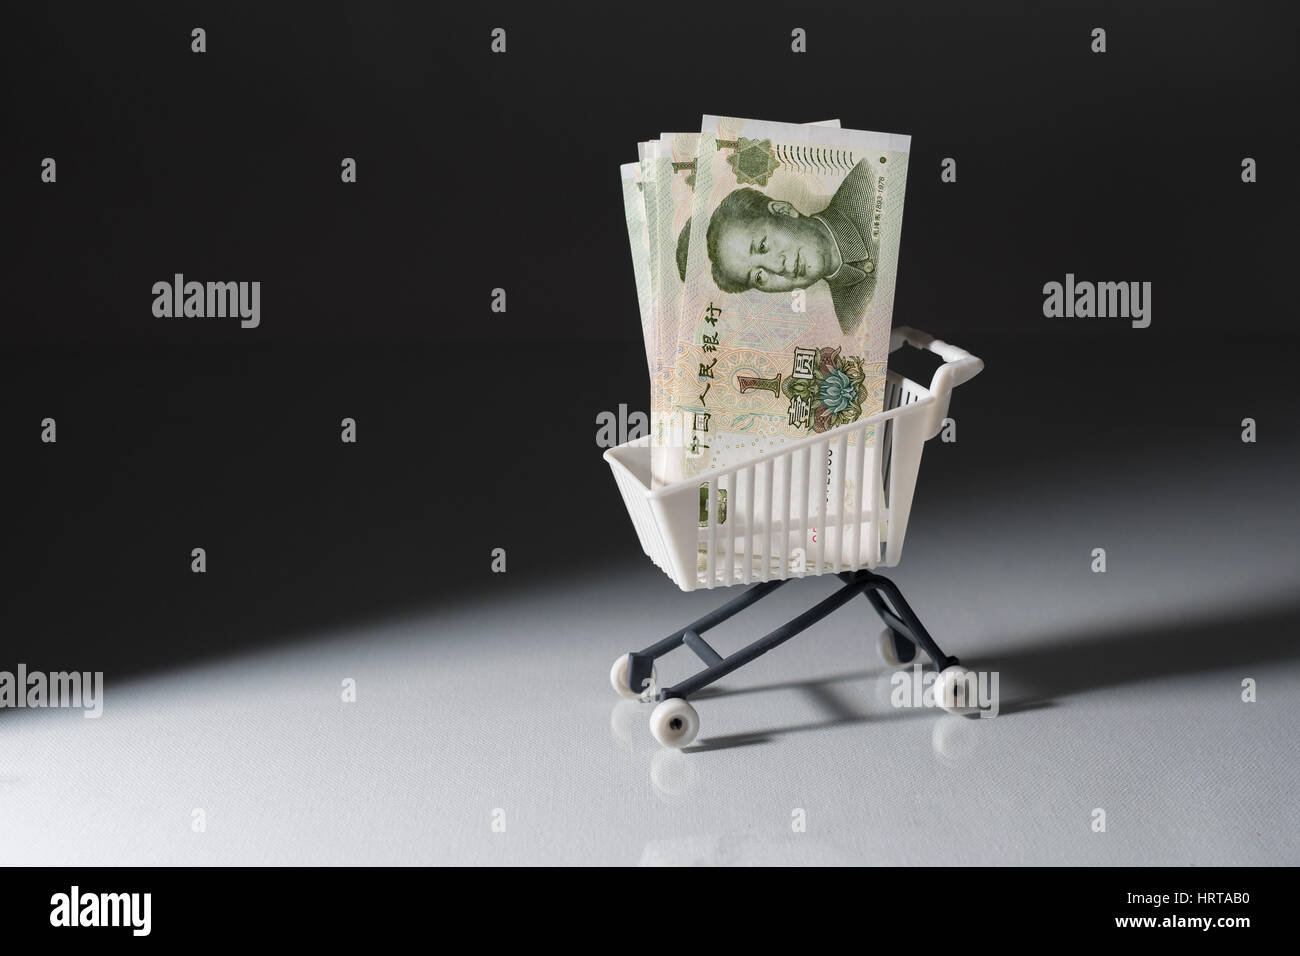 1 Yuan bills / banknotes in shopping cart / trolley against dark background. Metaphor for Chinese economy, budget, spending power, consumer spending. Stock Photo